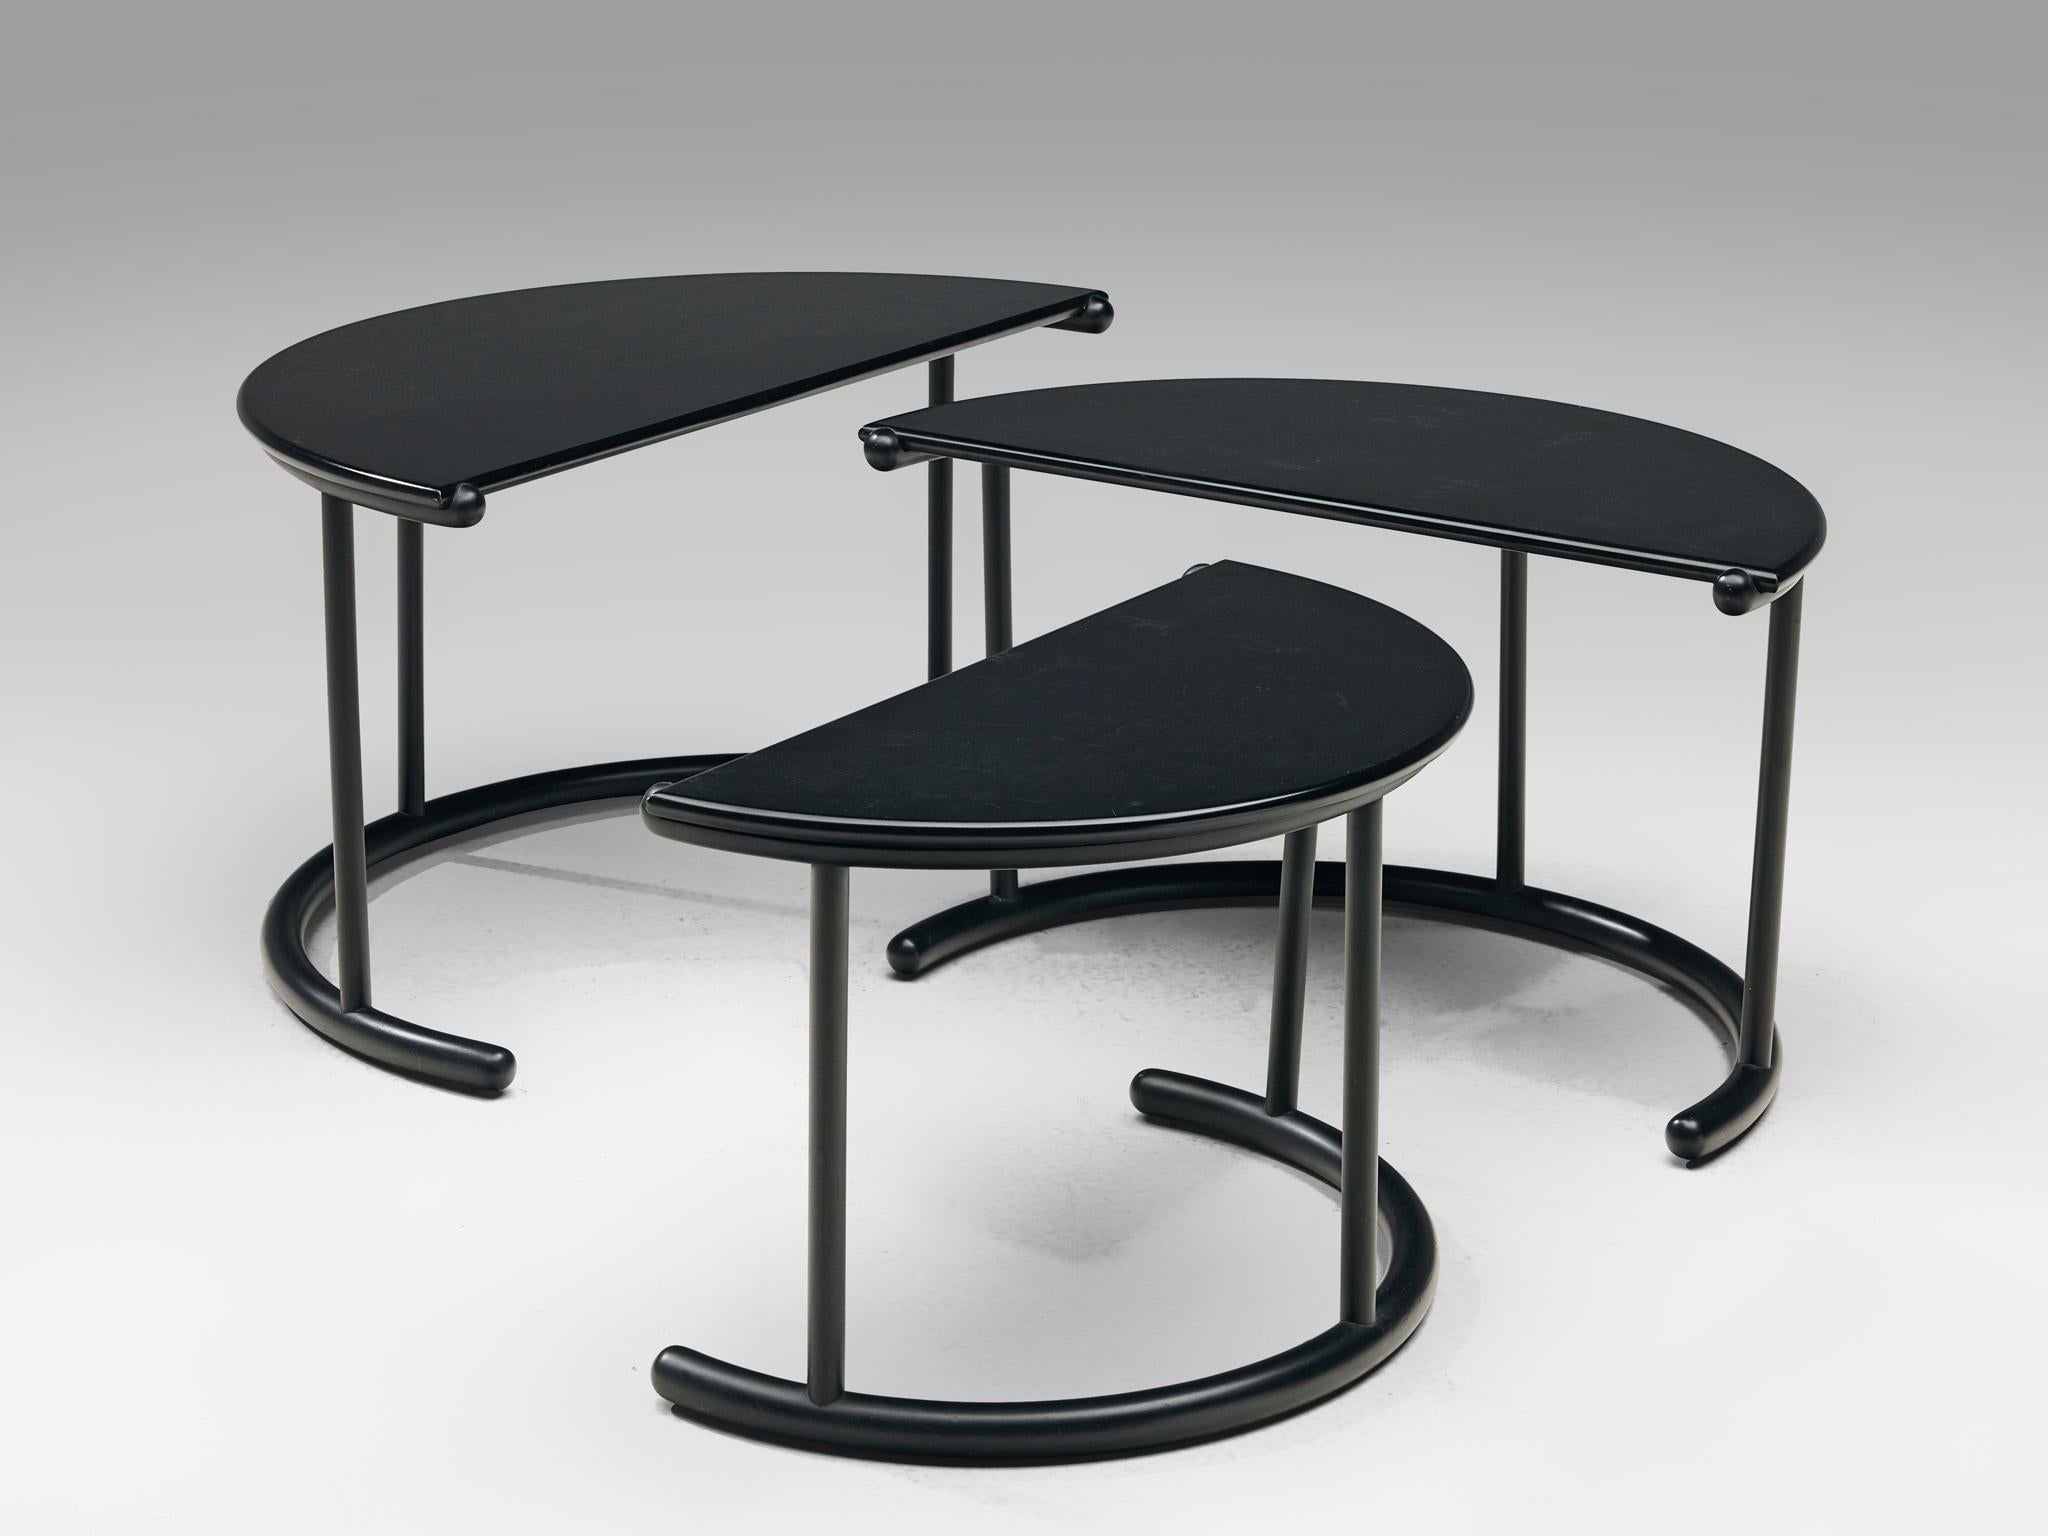 Gianfranco Frattini for Acerbis, set of three 'Tria' nesting tables, lacquered wood, Italy, 1980s

A set of three nesting tables by the Italian designer Gianfranco Frattini. Each table consists of a semi-circled tabletop in black lacquered wood. The